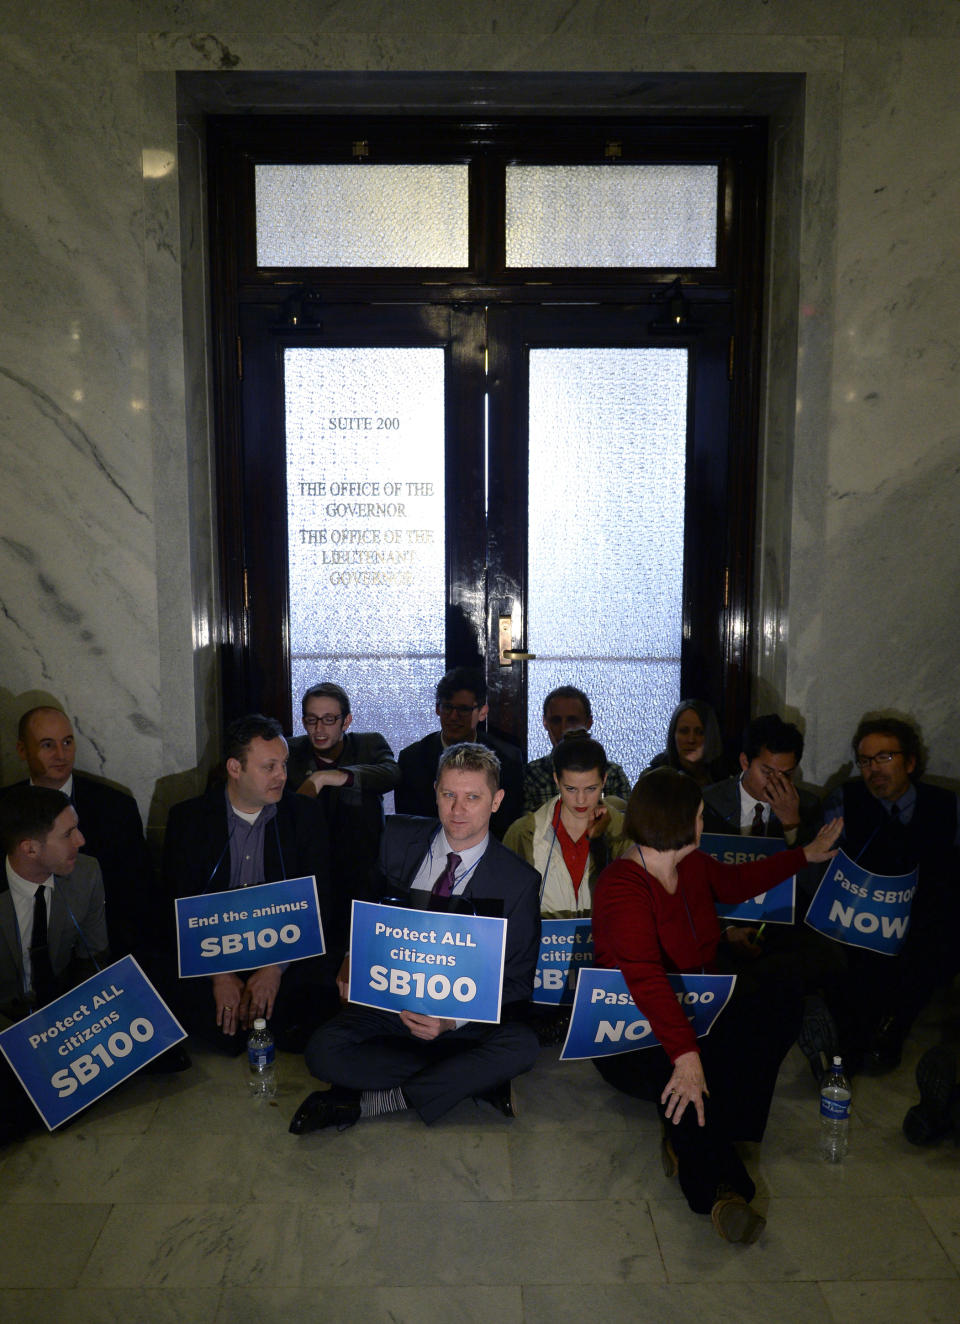 Protesters calling for a statewide anti-discrimination law that includes sexual and gender orientation protections block the front entrance to the governor's office during a stand-in at the Capitol in Salt Lake City on Monday, Feb. 9, 2014. Organizer and Equality Utah volunteer Donna Weinholtz told The Salt Lake Tribune that demonstrators are asking Herbert to issue an executive order passing the anti-discrimination measure. (AP Photo/The Salt Lake Tribune, Francisco Kjolseth)